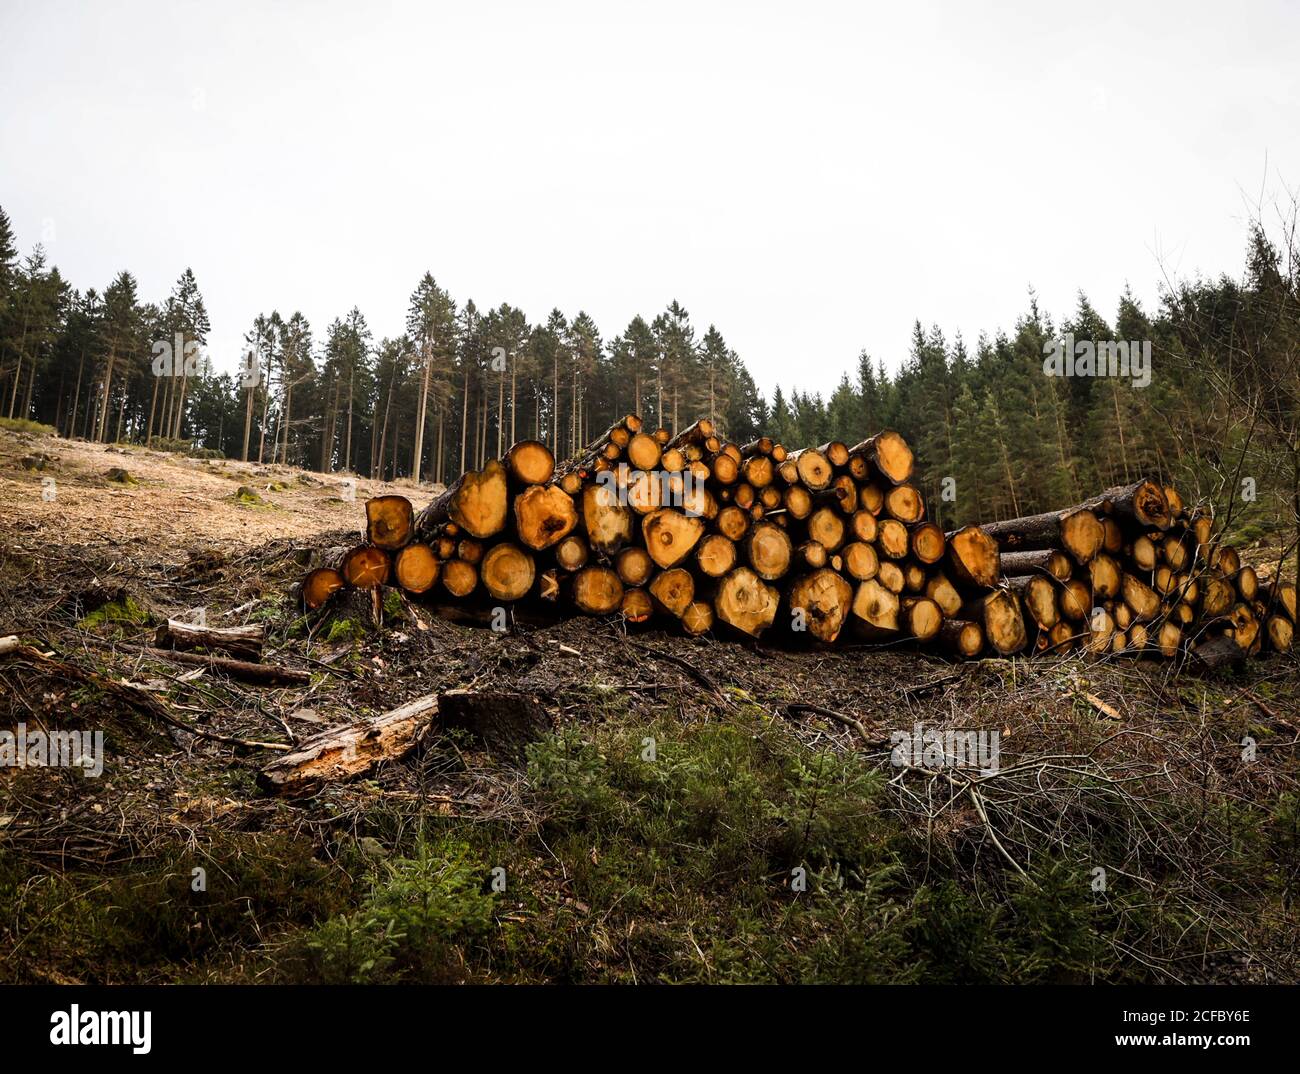 Damage to forests due to drought, bark beetles and storms Stock Photo